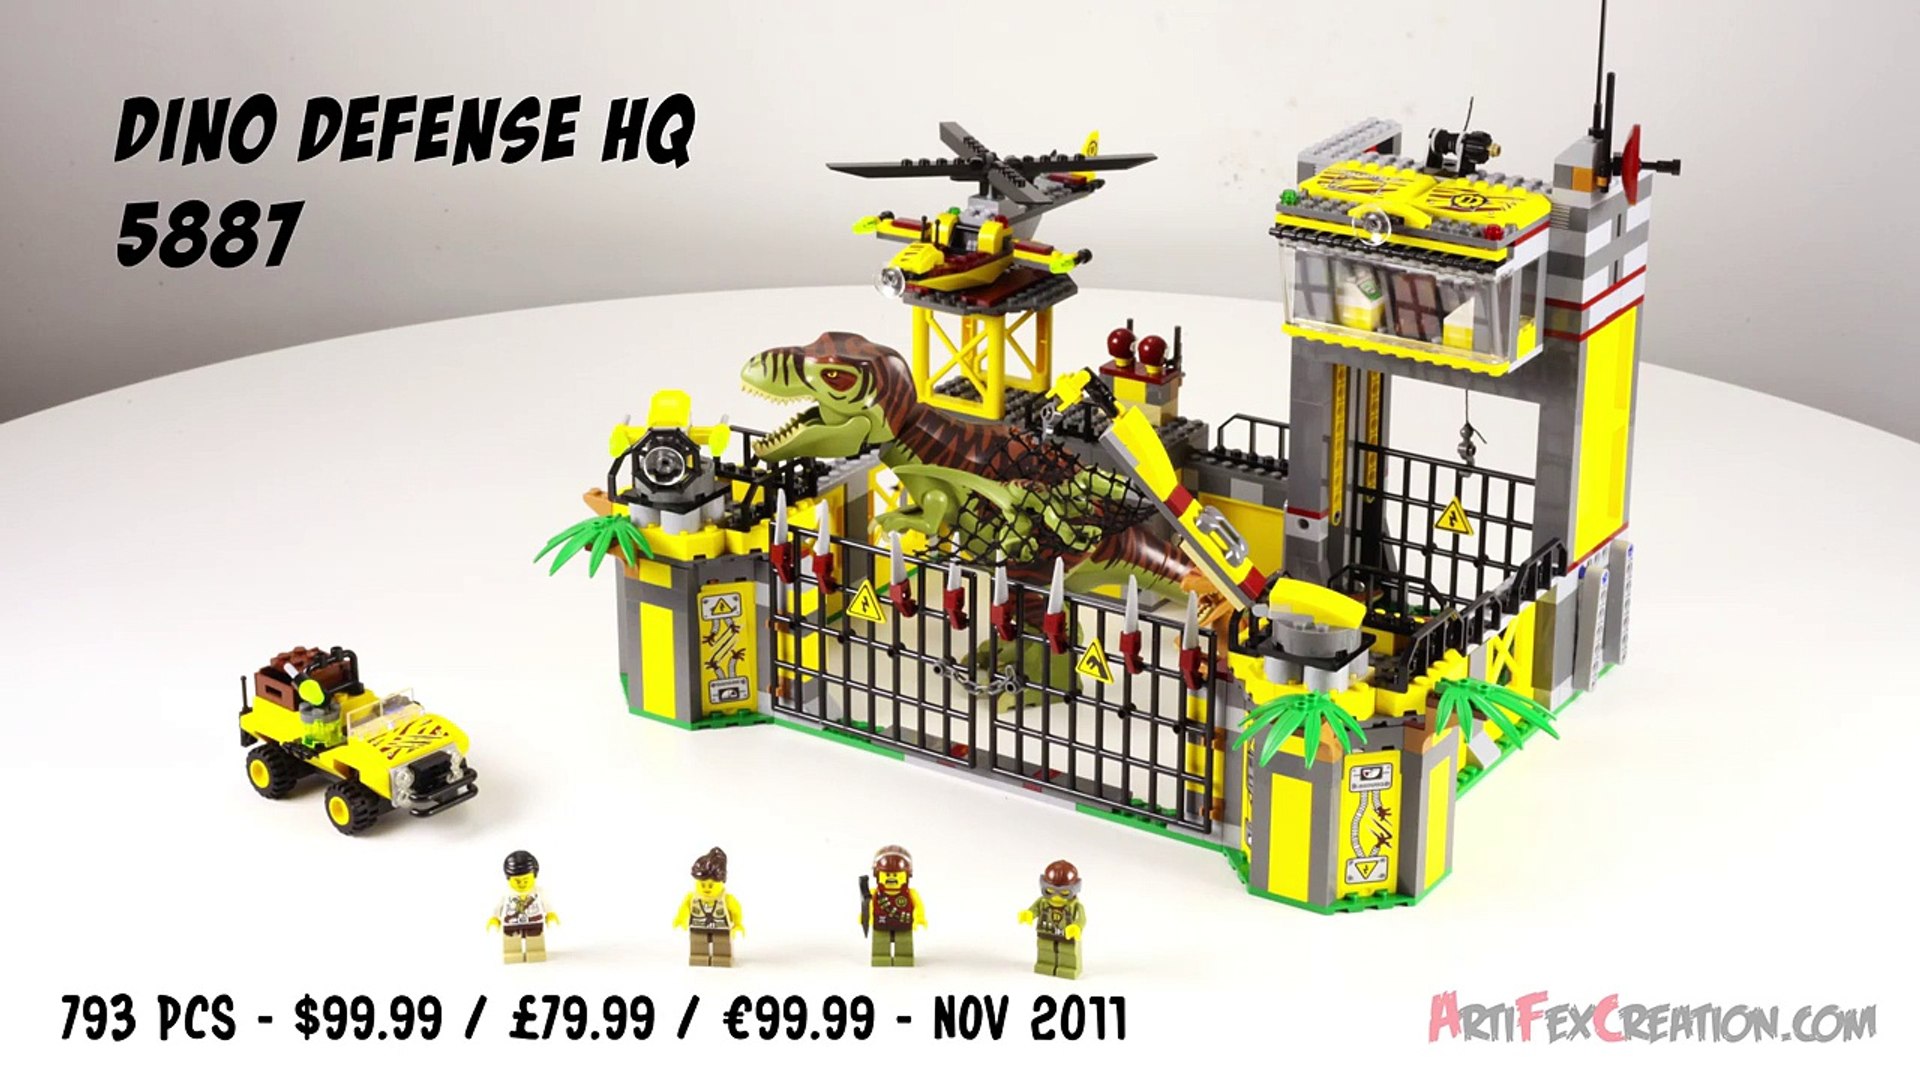 Lego DINO DEFENSE HQ 5887 Stop Motion Build Review - video Dailymotion